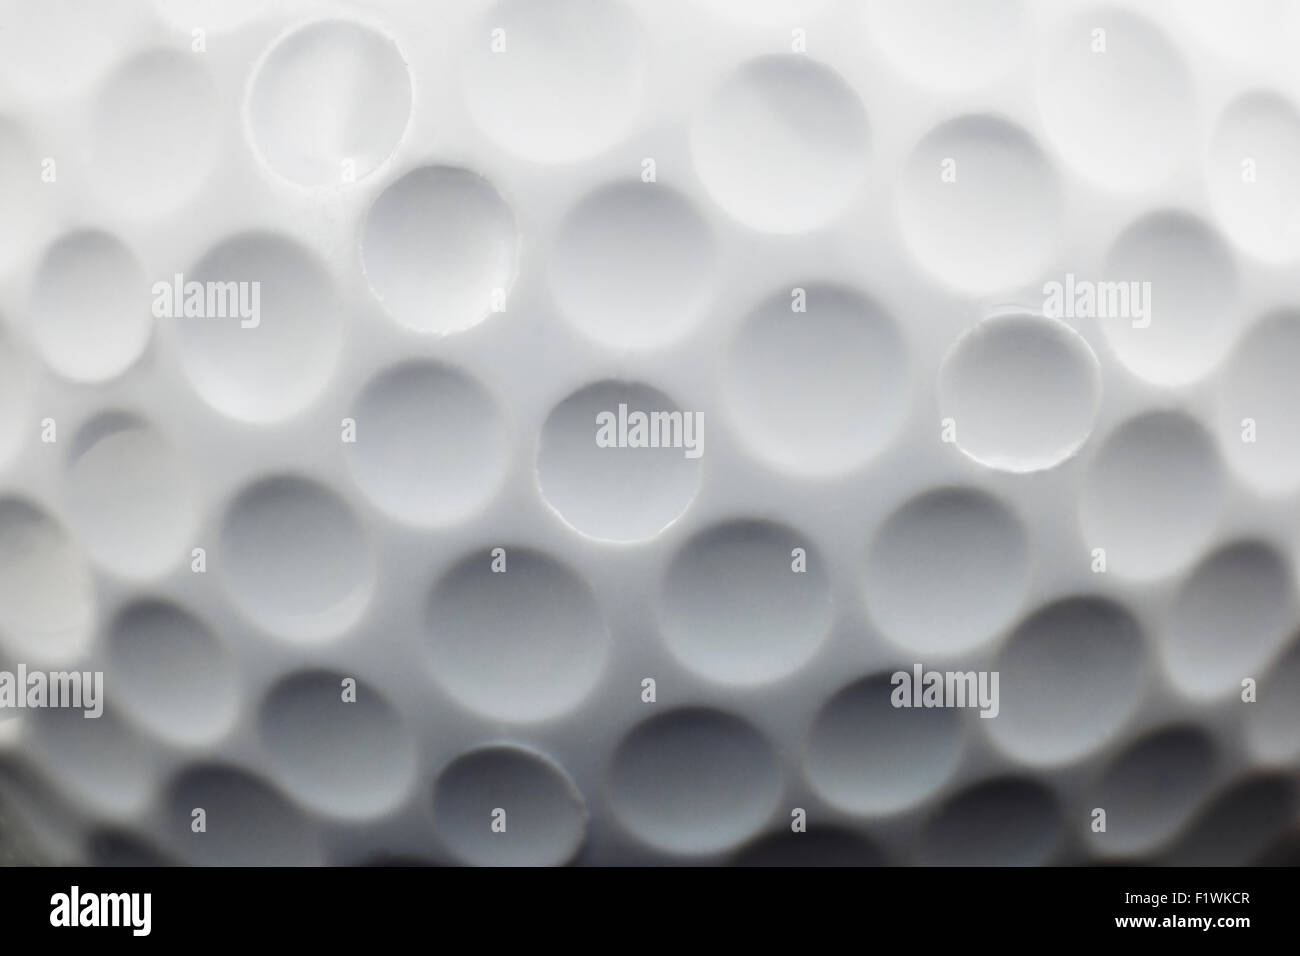 close up view showing dimples on a golf ball Stock Photo